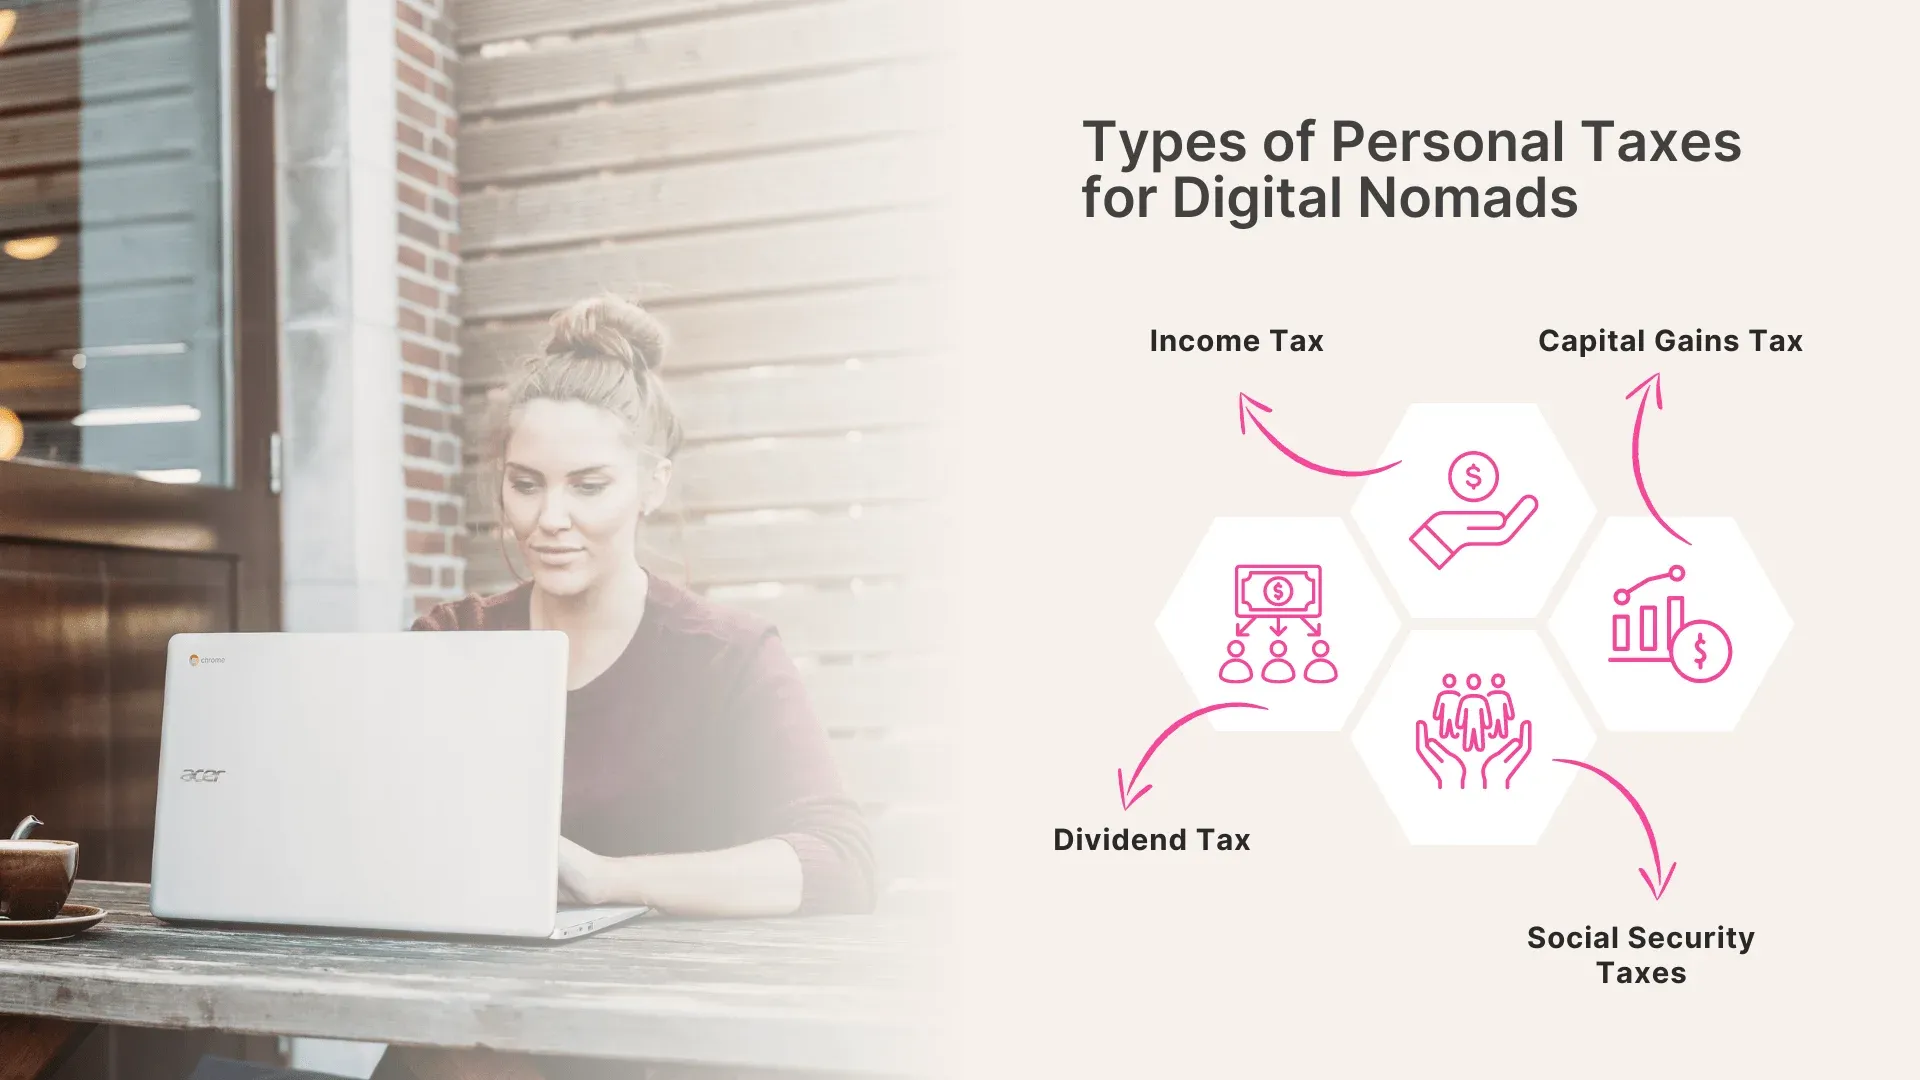 Infographic on the types of taxes for digital nomads